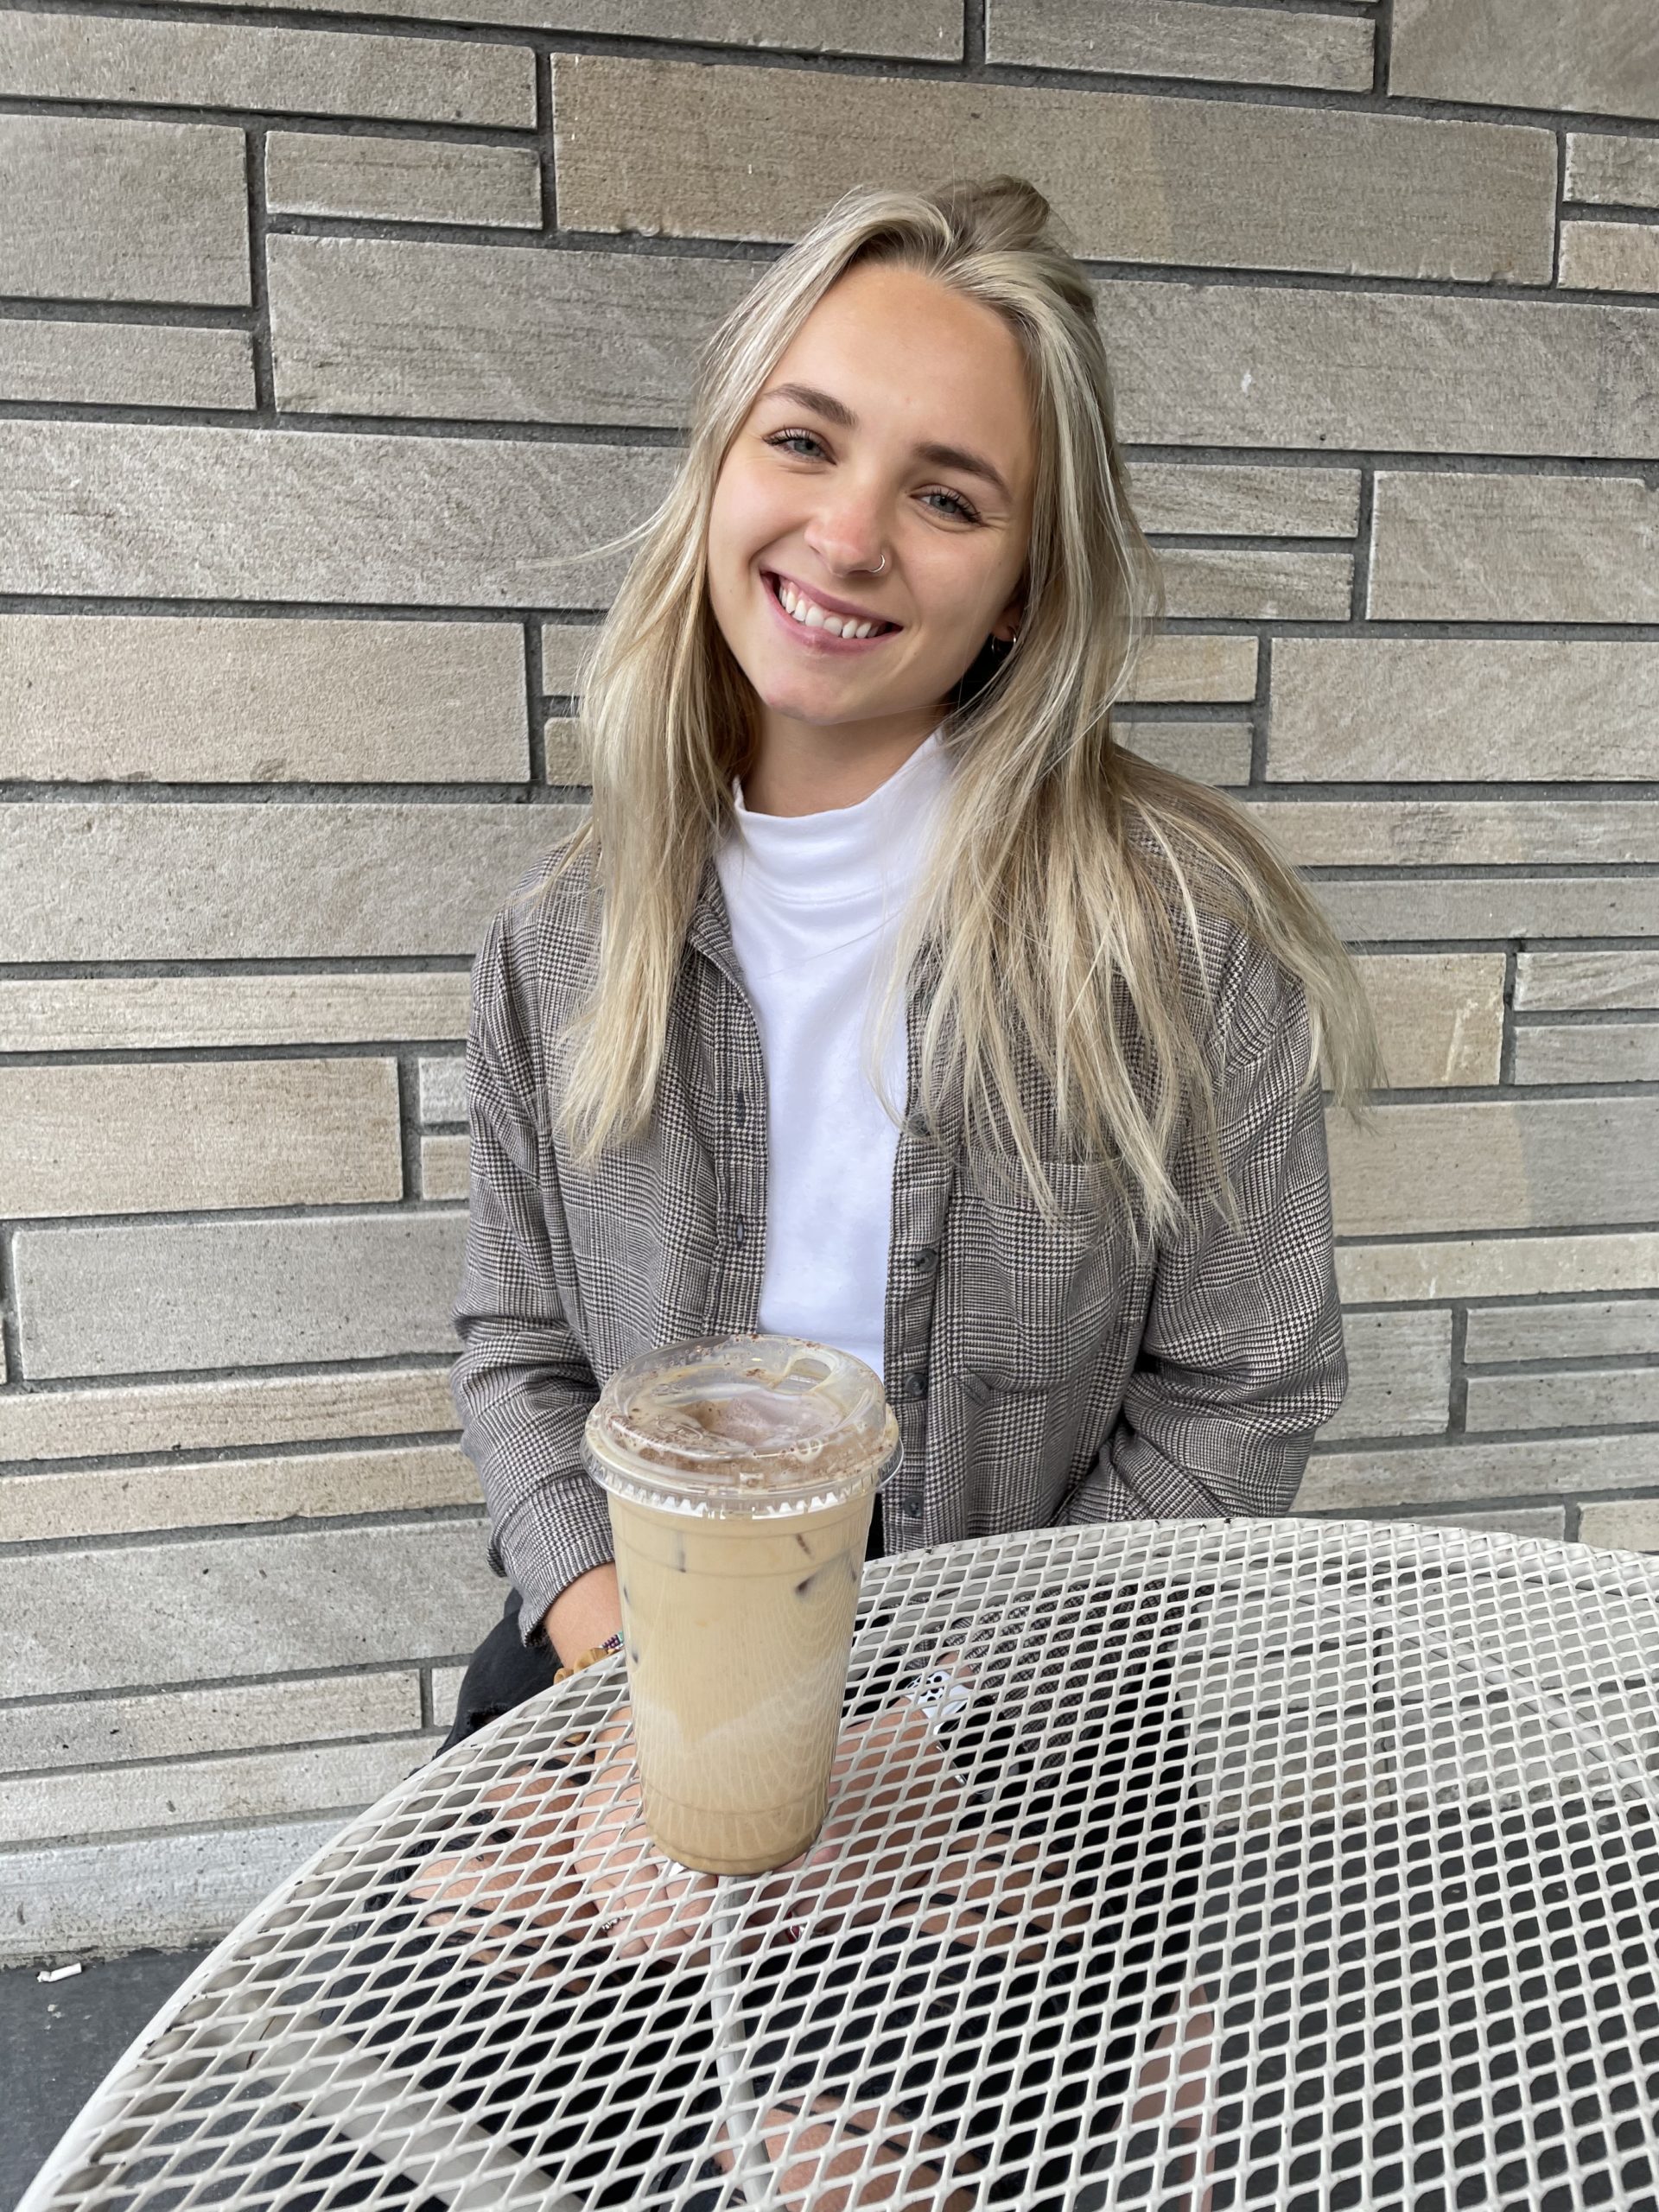 a girl sitting and smiling with an iced coffee in front of her